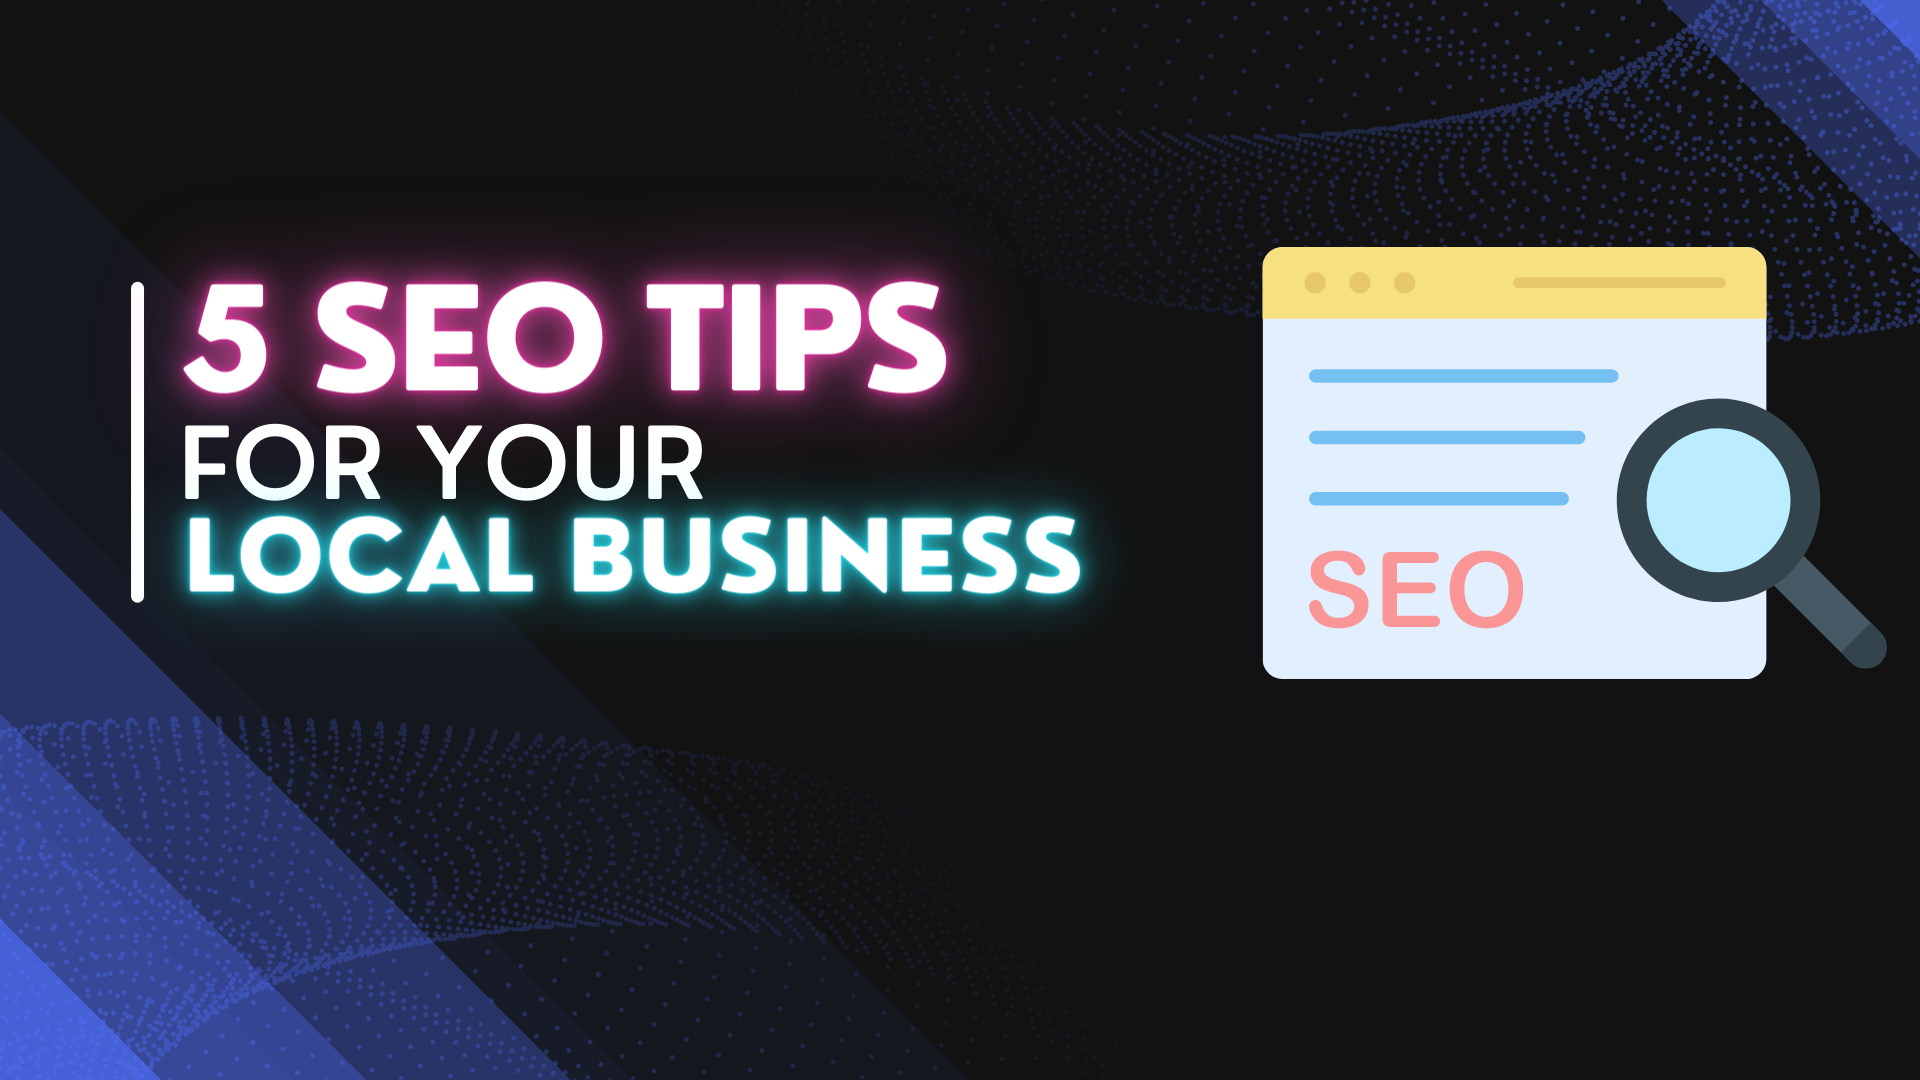 5 SEO Tips For Your Local Business